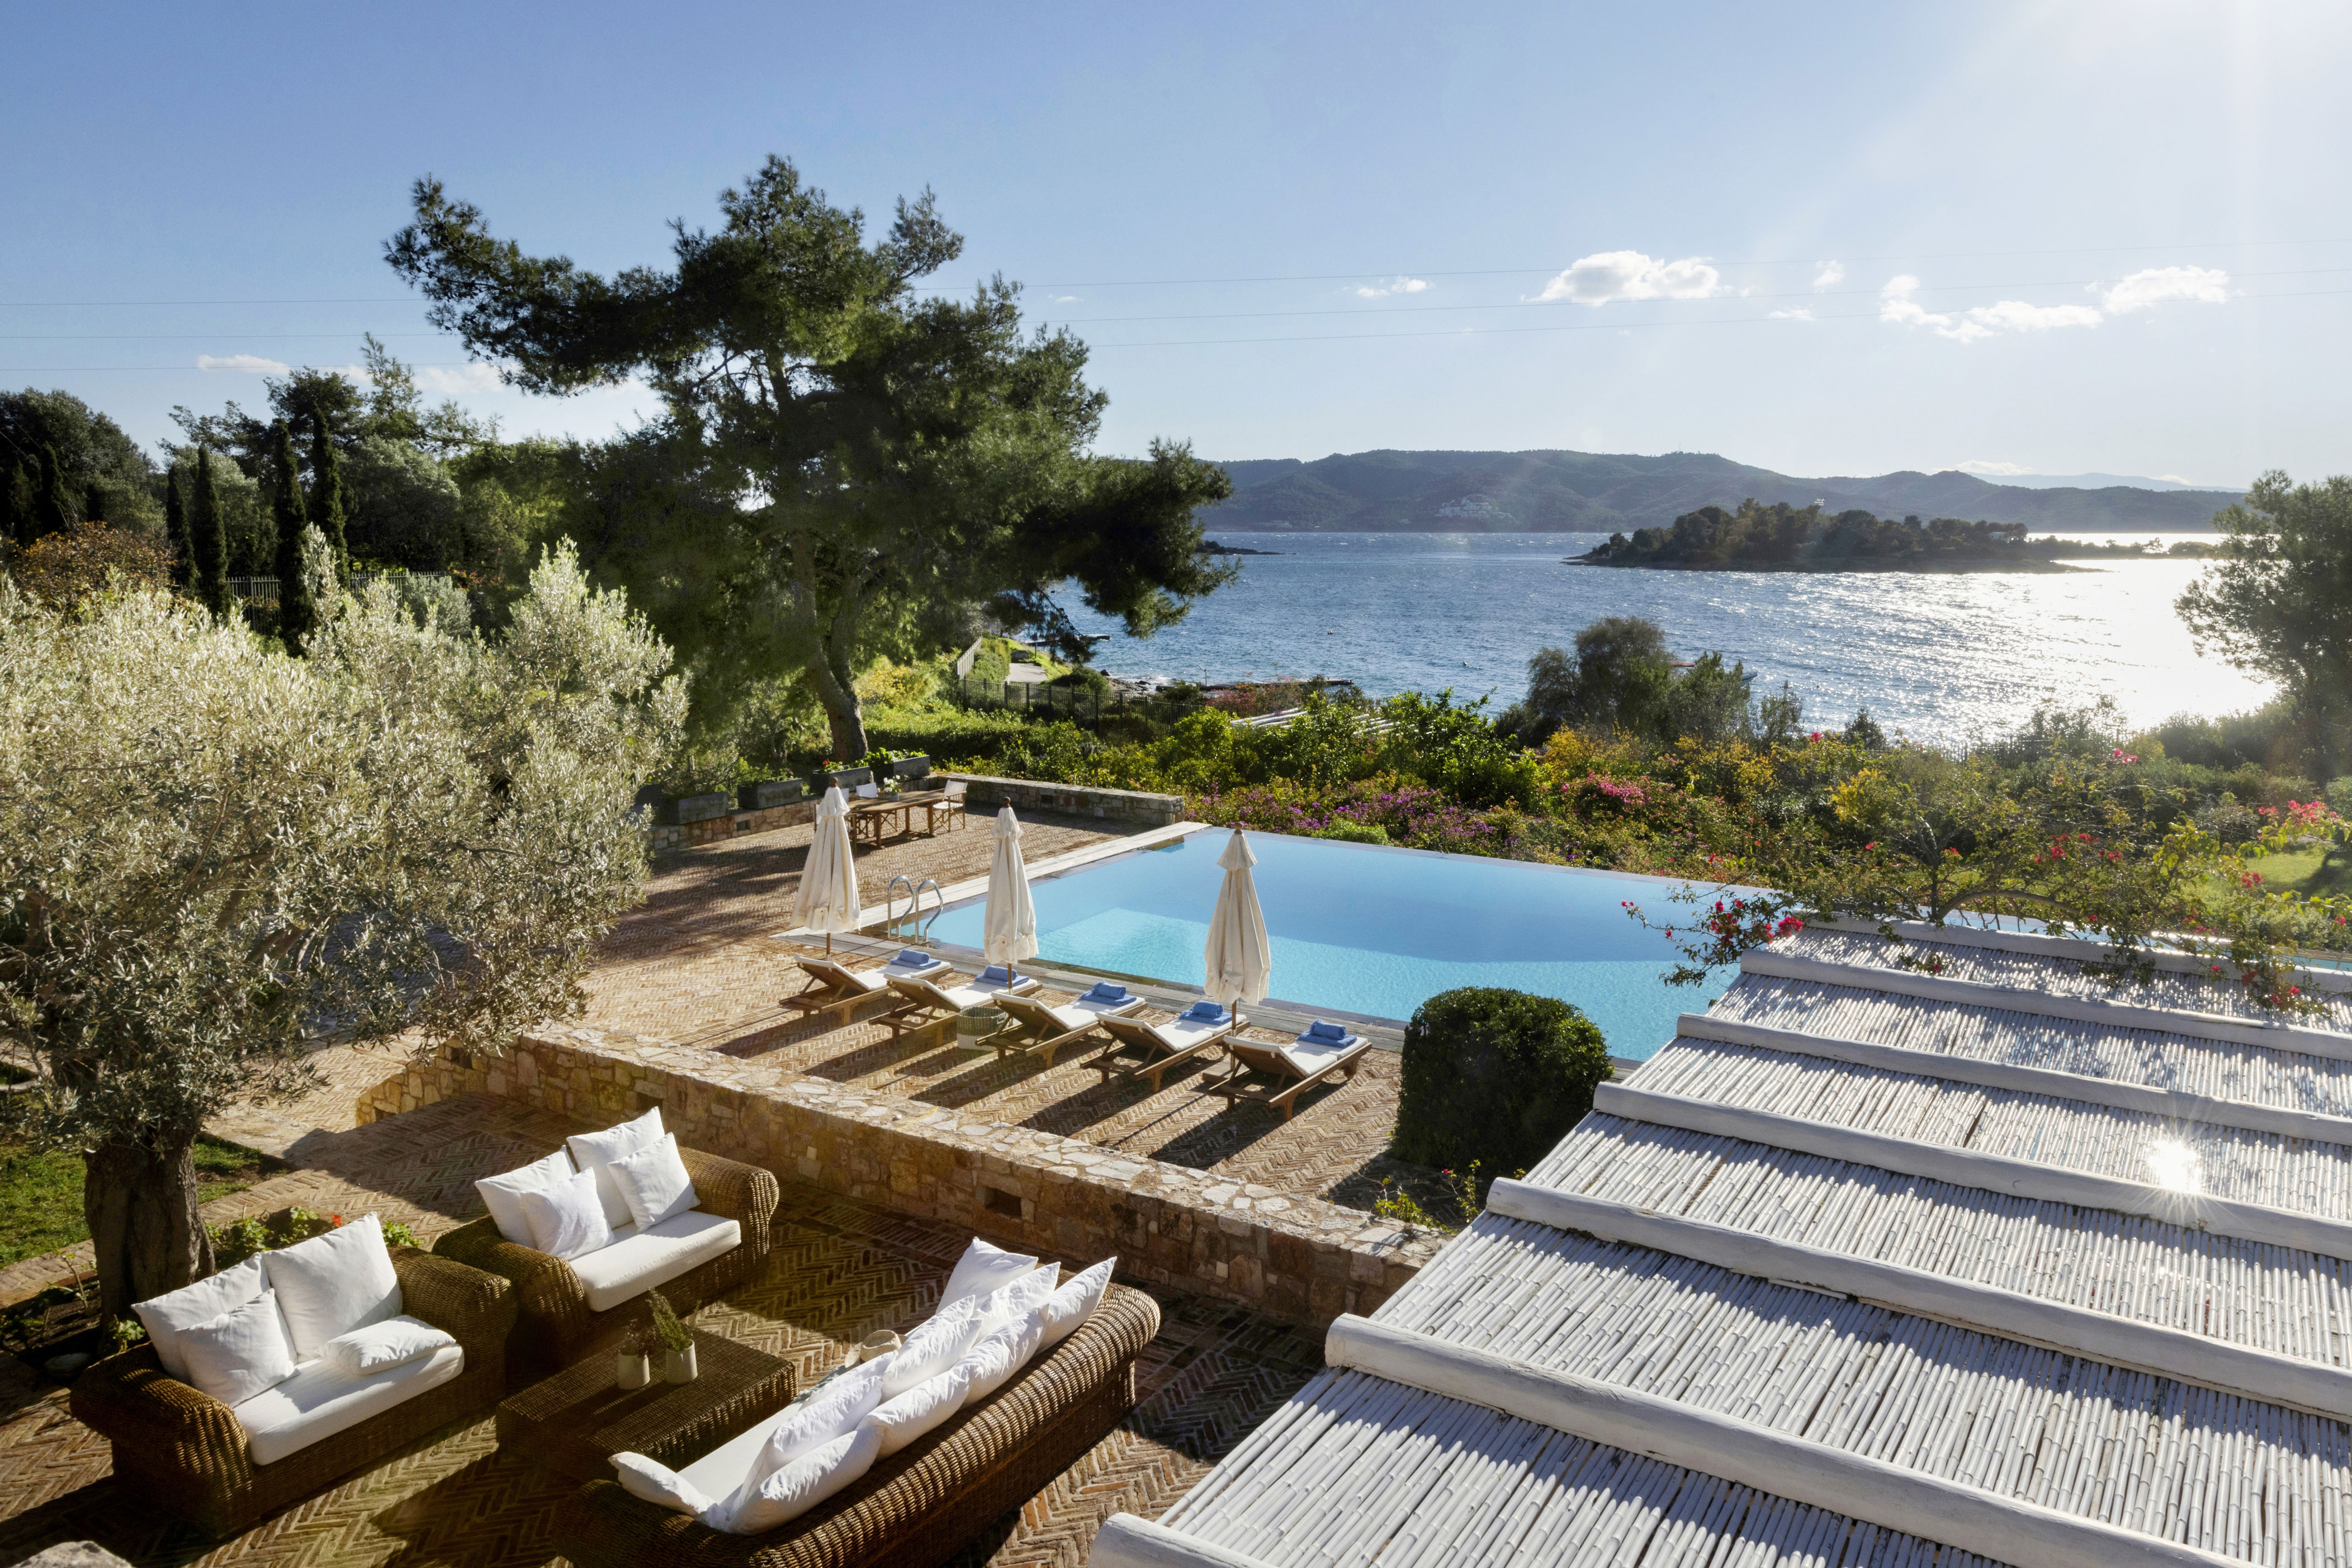 <p><strong>Chrisi Akti, Paros</strong></p> <p>It’s easy to mistake parts of Santhia for a hotel—the infinity pool with an alfresco kitchen and bar in the background look like something out of a smart resort. You can enjoy it all to yourself though, along with the six exquisite bedrooms and six bathrooms, all resplendent in minimalist Mediterranean chic. The beachfront villa itself is outstanding but the outside is what you’ll remember most. You can sunbathe from the pool via the “floating” wooden platforms in the shallow end or take a dip in the plunge pool. Follow the winding path through the gardens and down to the gate where you’ll find a few steps that lead down to the sandy beach. It doesn’t get much better.</p> <p><strong>Sleeps:</strong> 12<br> <strong>Price:</strong> From $13,125 per week</p> <div class="callout"><p><a href="https://cna.st/affiliate-link/29CLTwheRZNbkfg8W7wRjEcikT3bLevA9Bw6xNdDkTfMLriAV4iYQ3nFxoVyzBVxKg3s2AULksR8q81JAuCJmZs7wFRjiWi8BxrNtCua6Dtbk2JSp9faN6VzsM2tu6TN2UVLAZ7uu2iR3GVPSrV5vQdbZDrm1P428mAMXxsNA6hYjJ" rel="sponsored" title="Book now at The Thinking Traveller">Book now at The Thinking Traveller</a></p> </div><p>Sign up to receive the latest news, expert tips, and inspiration on all things travel.</p><a href="https://www.cntraveler.com/newsletter/the-daily?sourceCode=msnsend">Inspire Me</a>